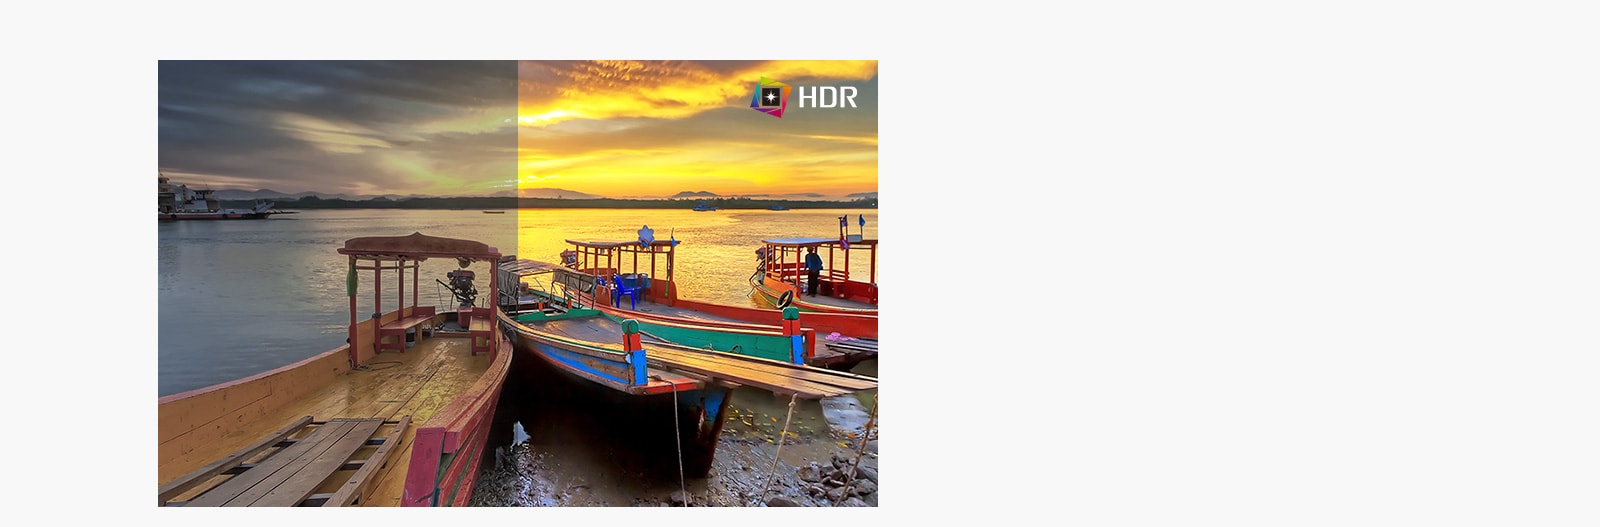 HDR technology with dramatic colors of the content when comparing to SDR